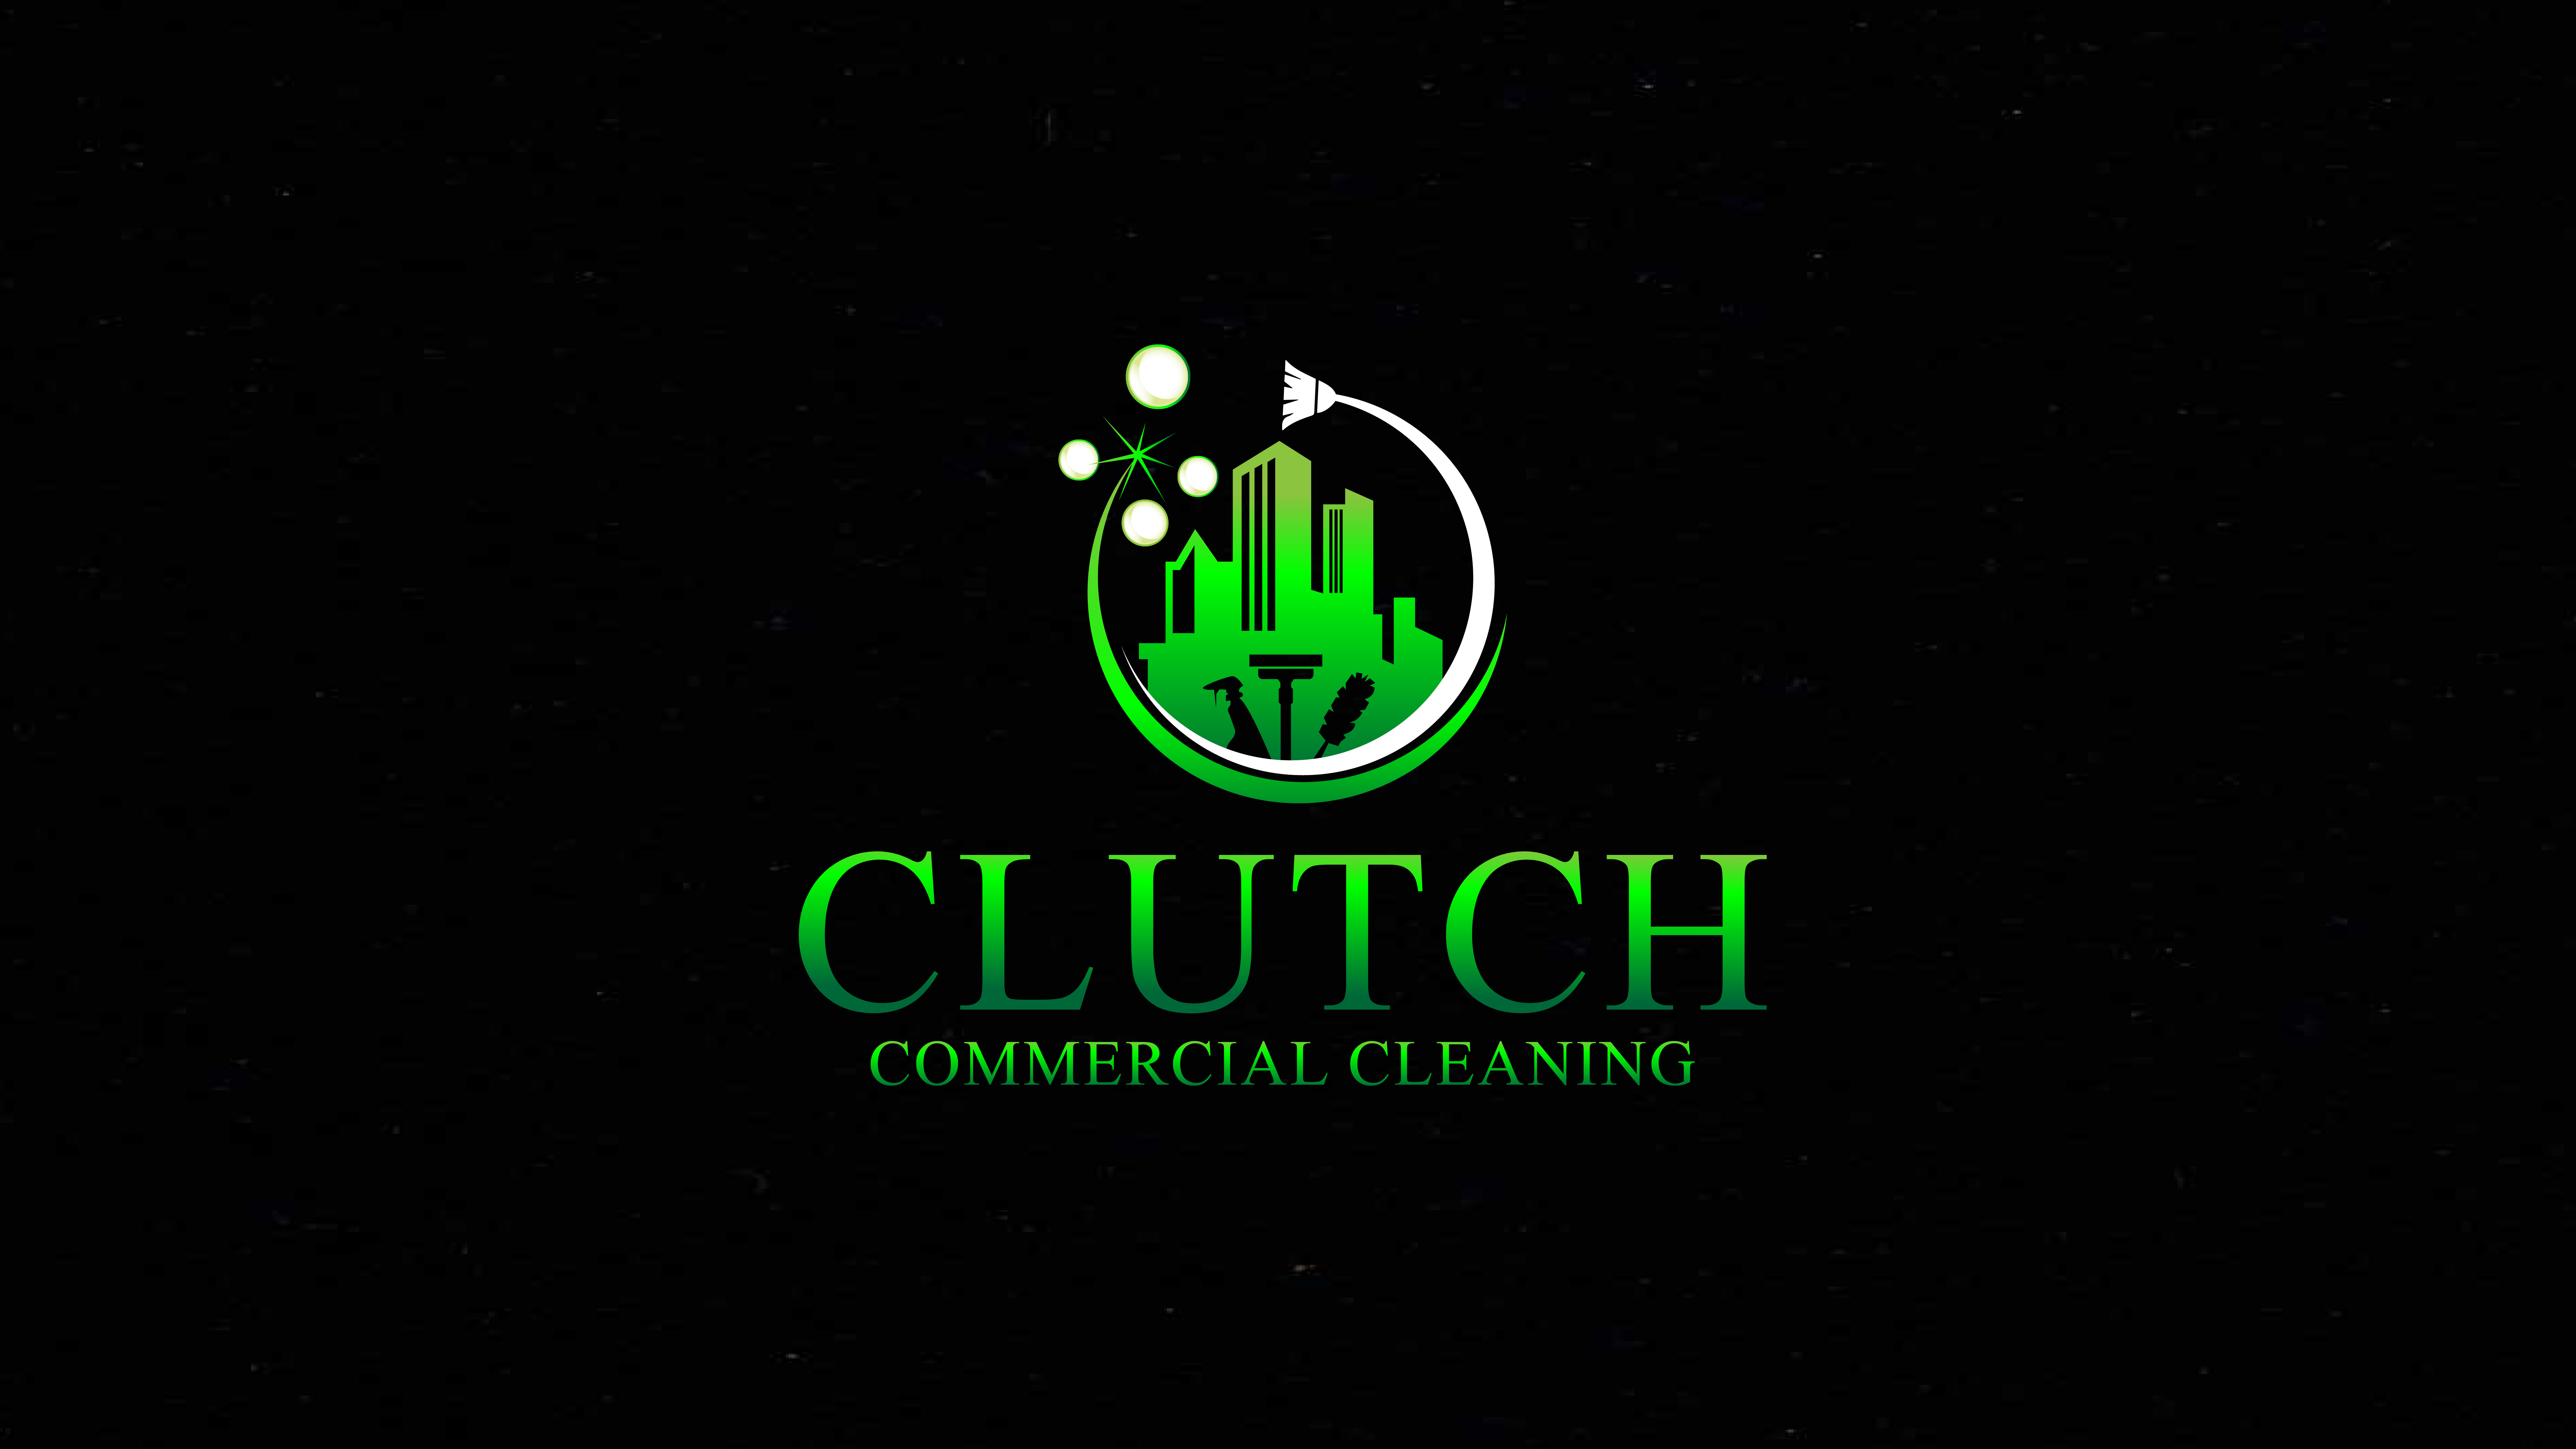 Clutch Commercial Cleaning Logo